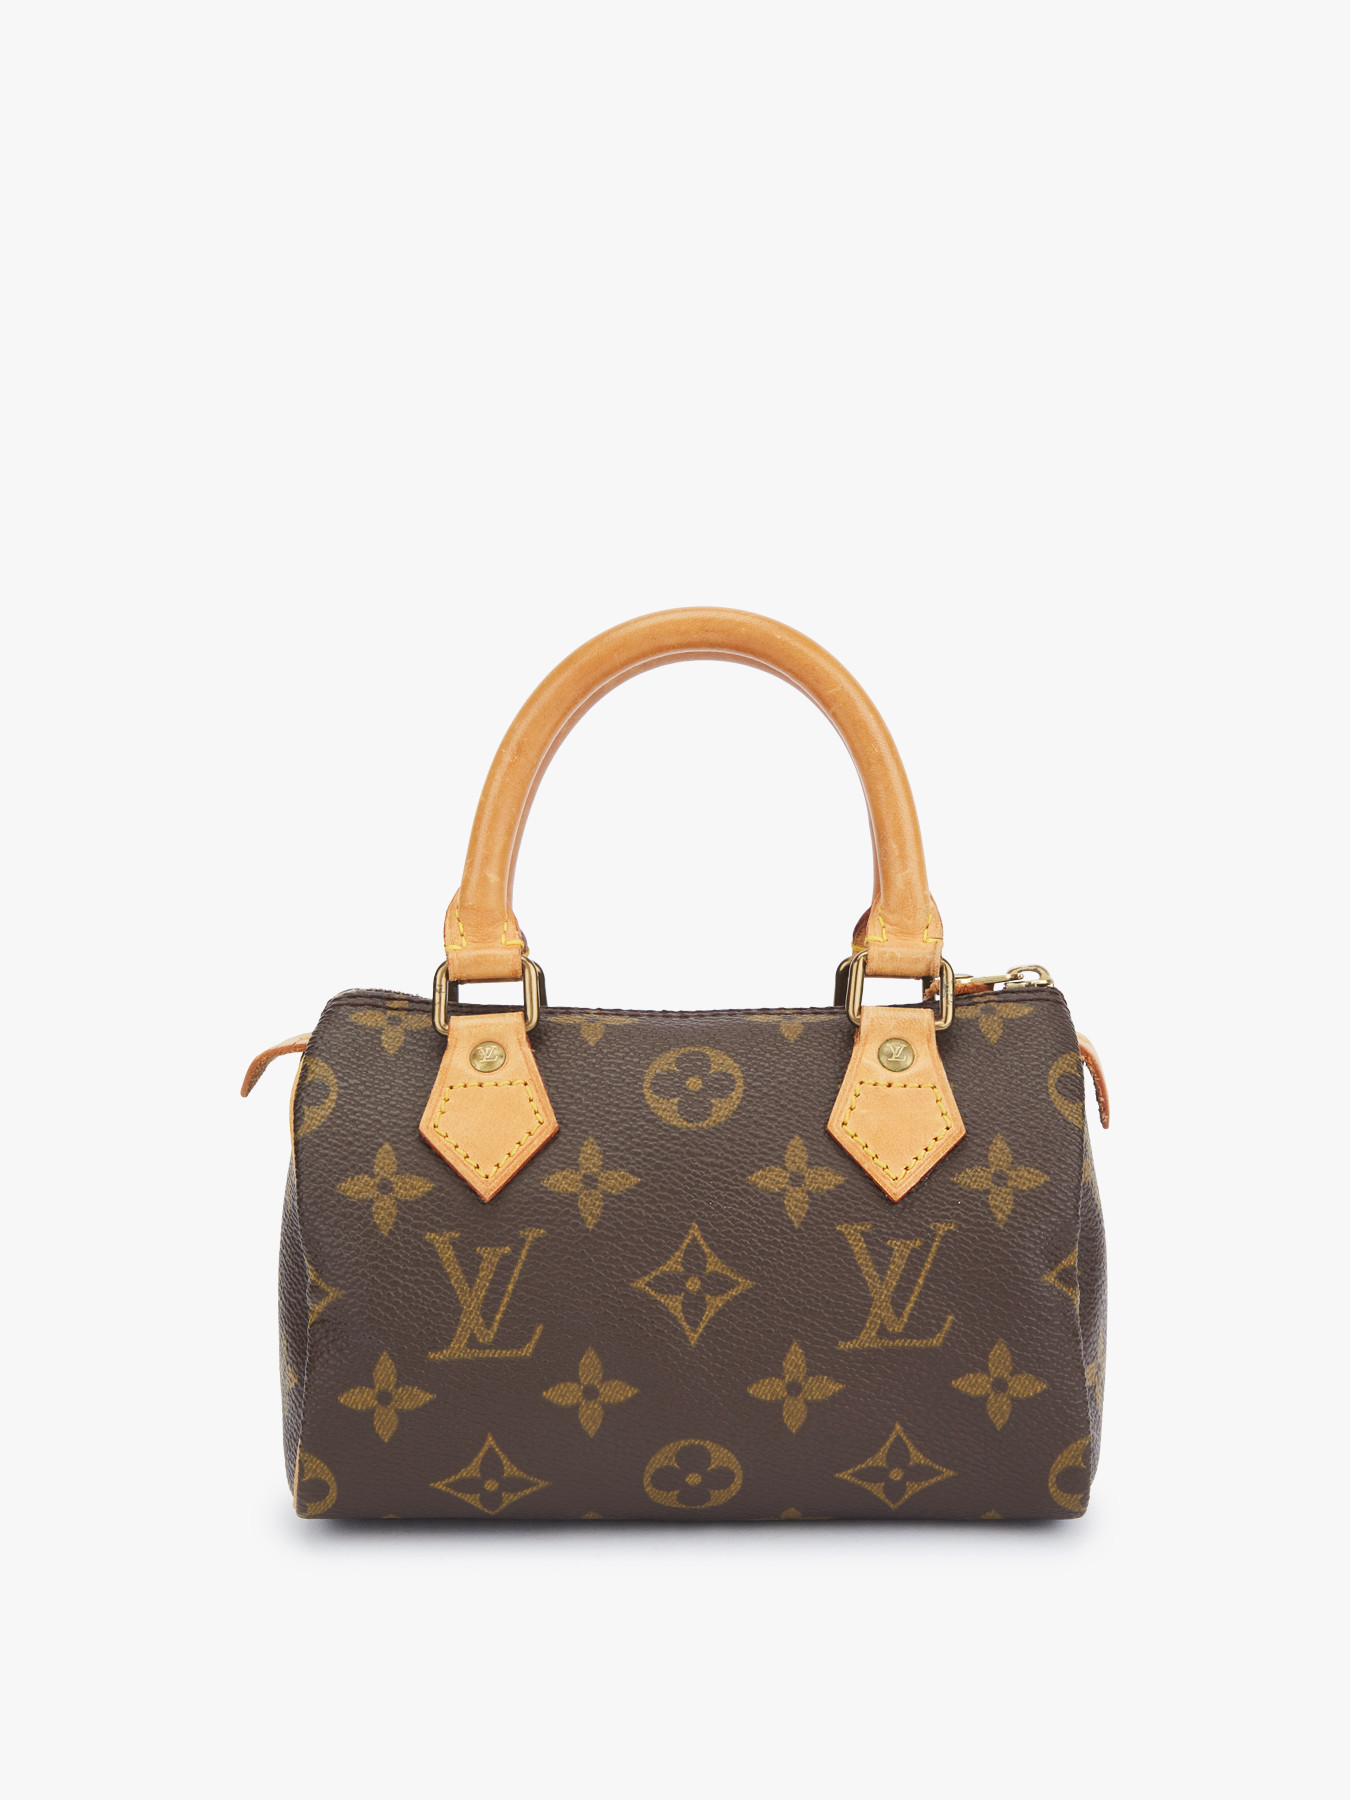 WHY I'M NOT BUYING THE NEW LOUIS VUITTON NANO SPEEDY & WHY THE ORIGINAL  NANO SPEEDY IS BETTER 